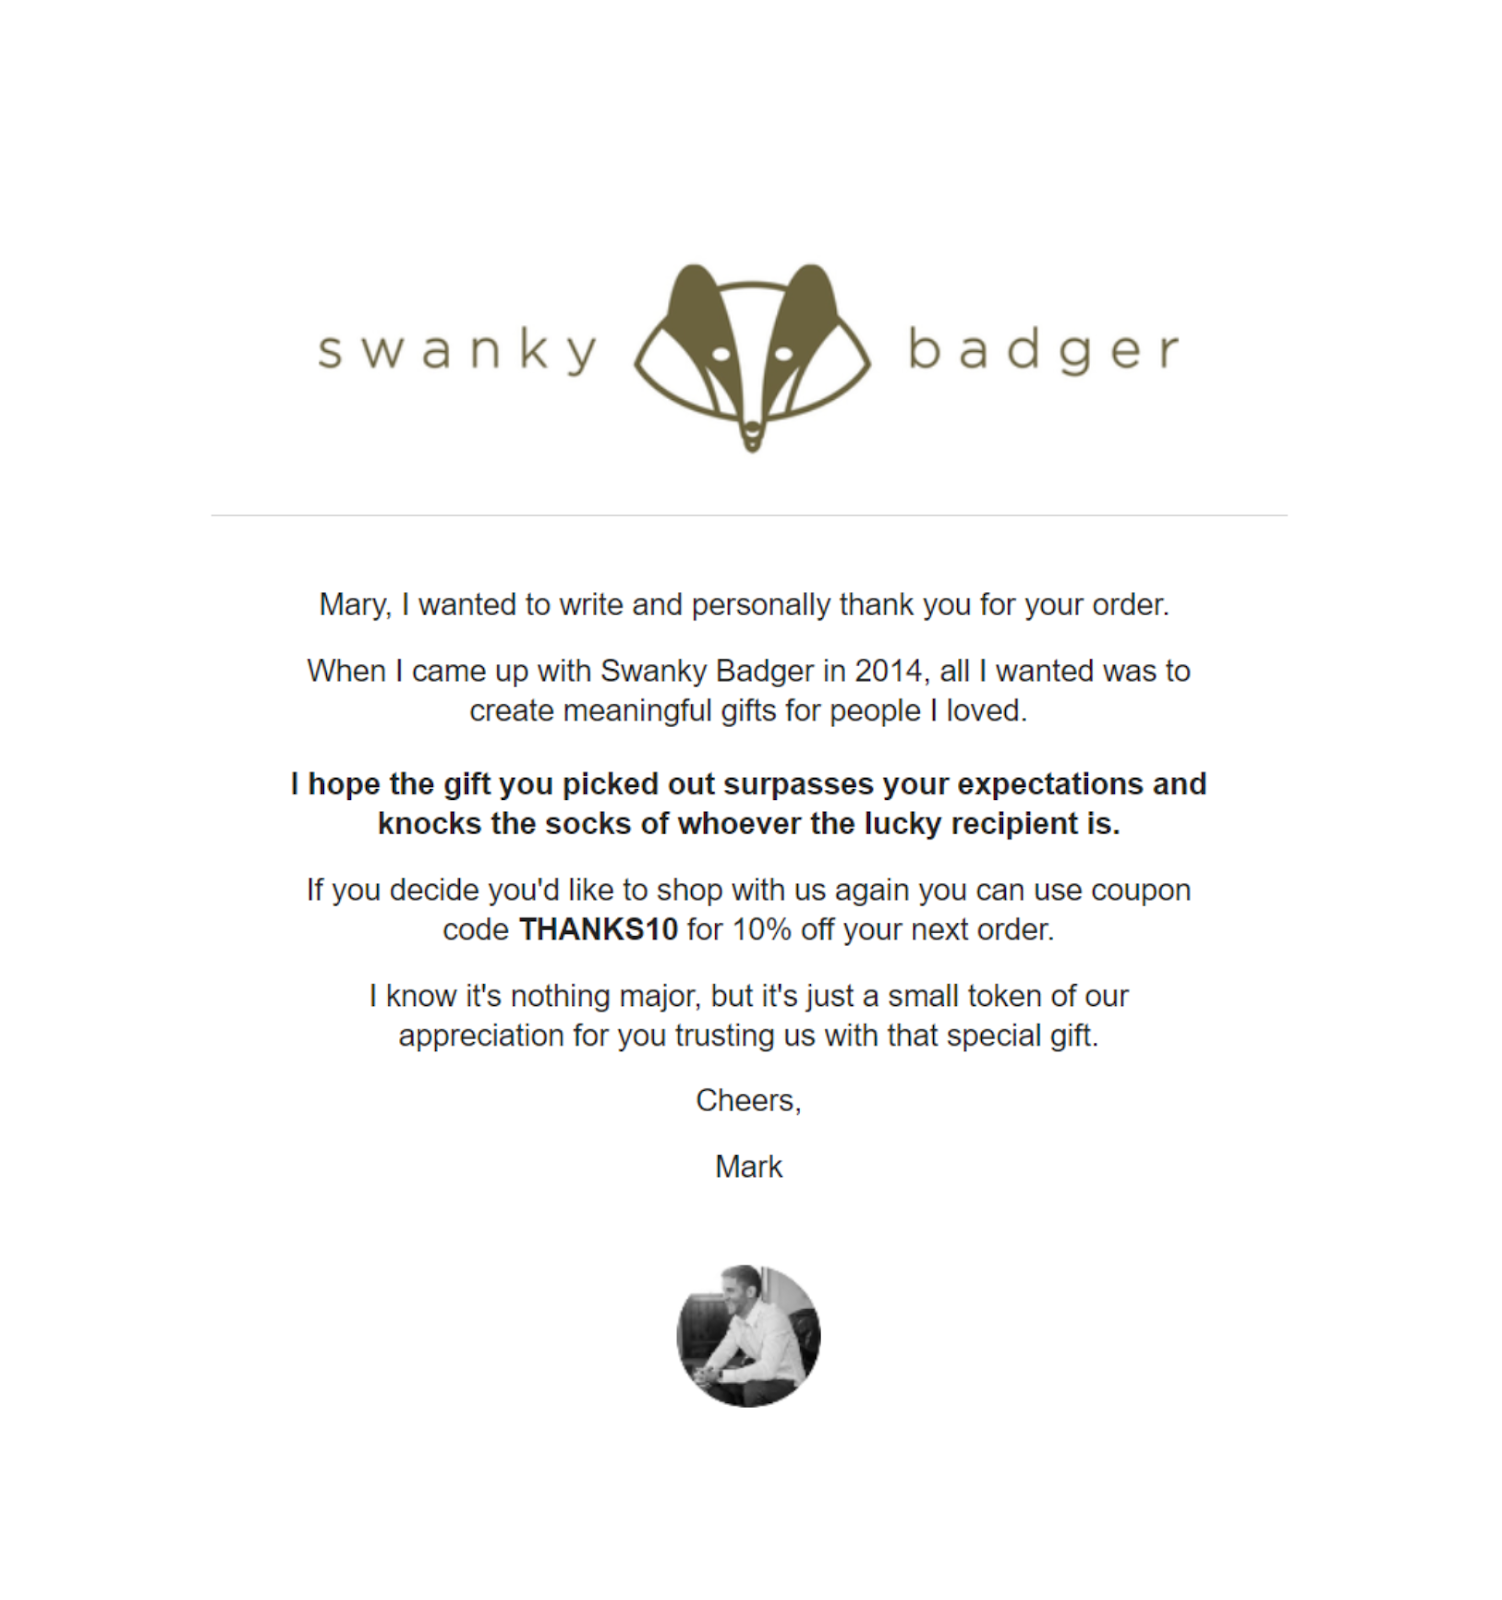 THE LIGHTLY PERSONALIZED THANK YOU CONFIRMATION EMAIL BY SWANKY BADGER